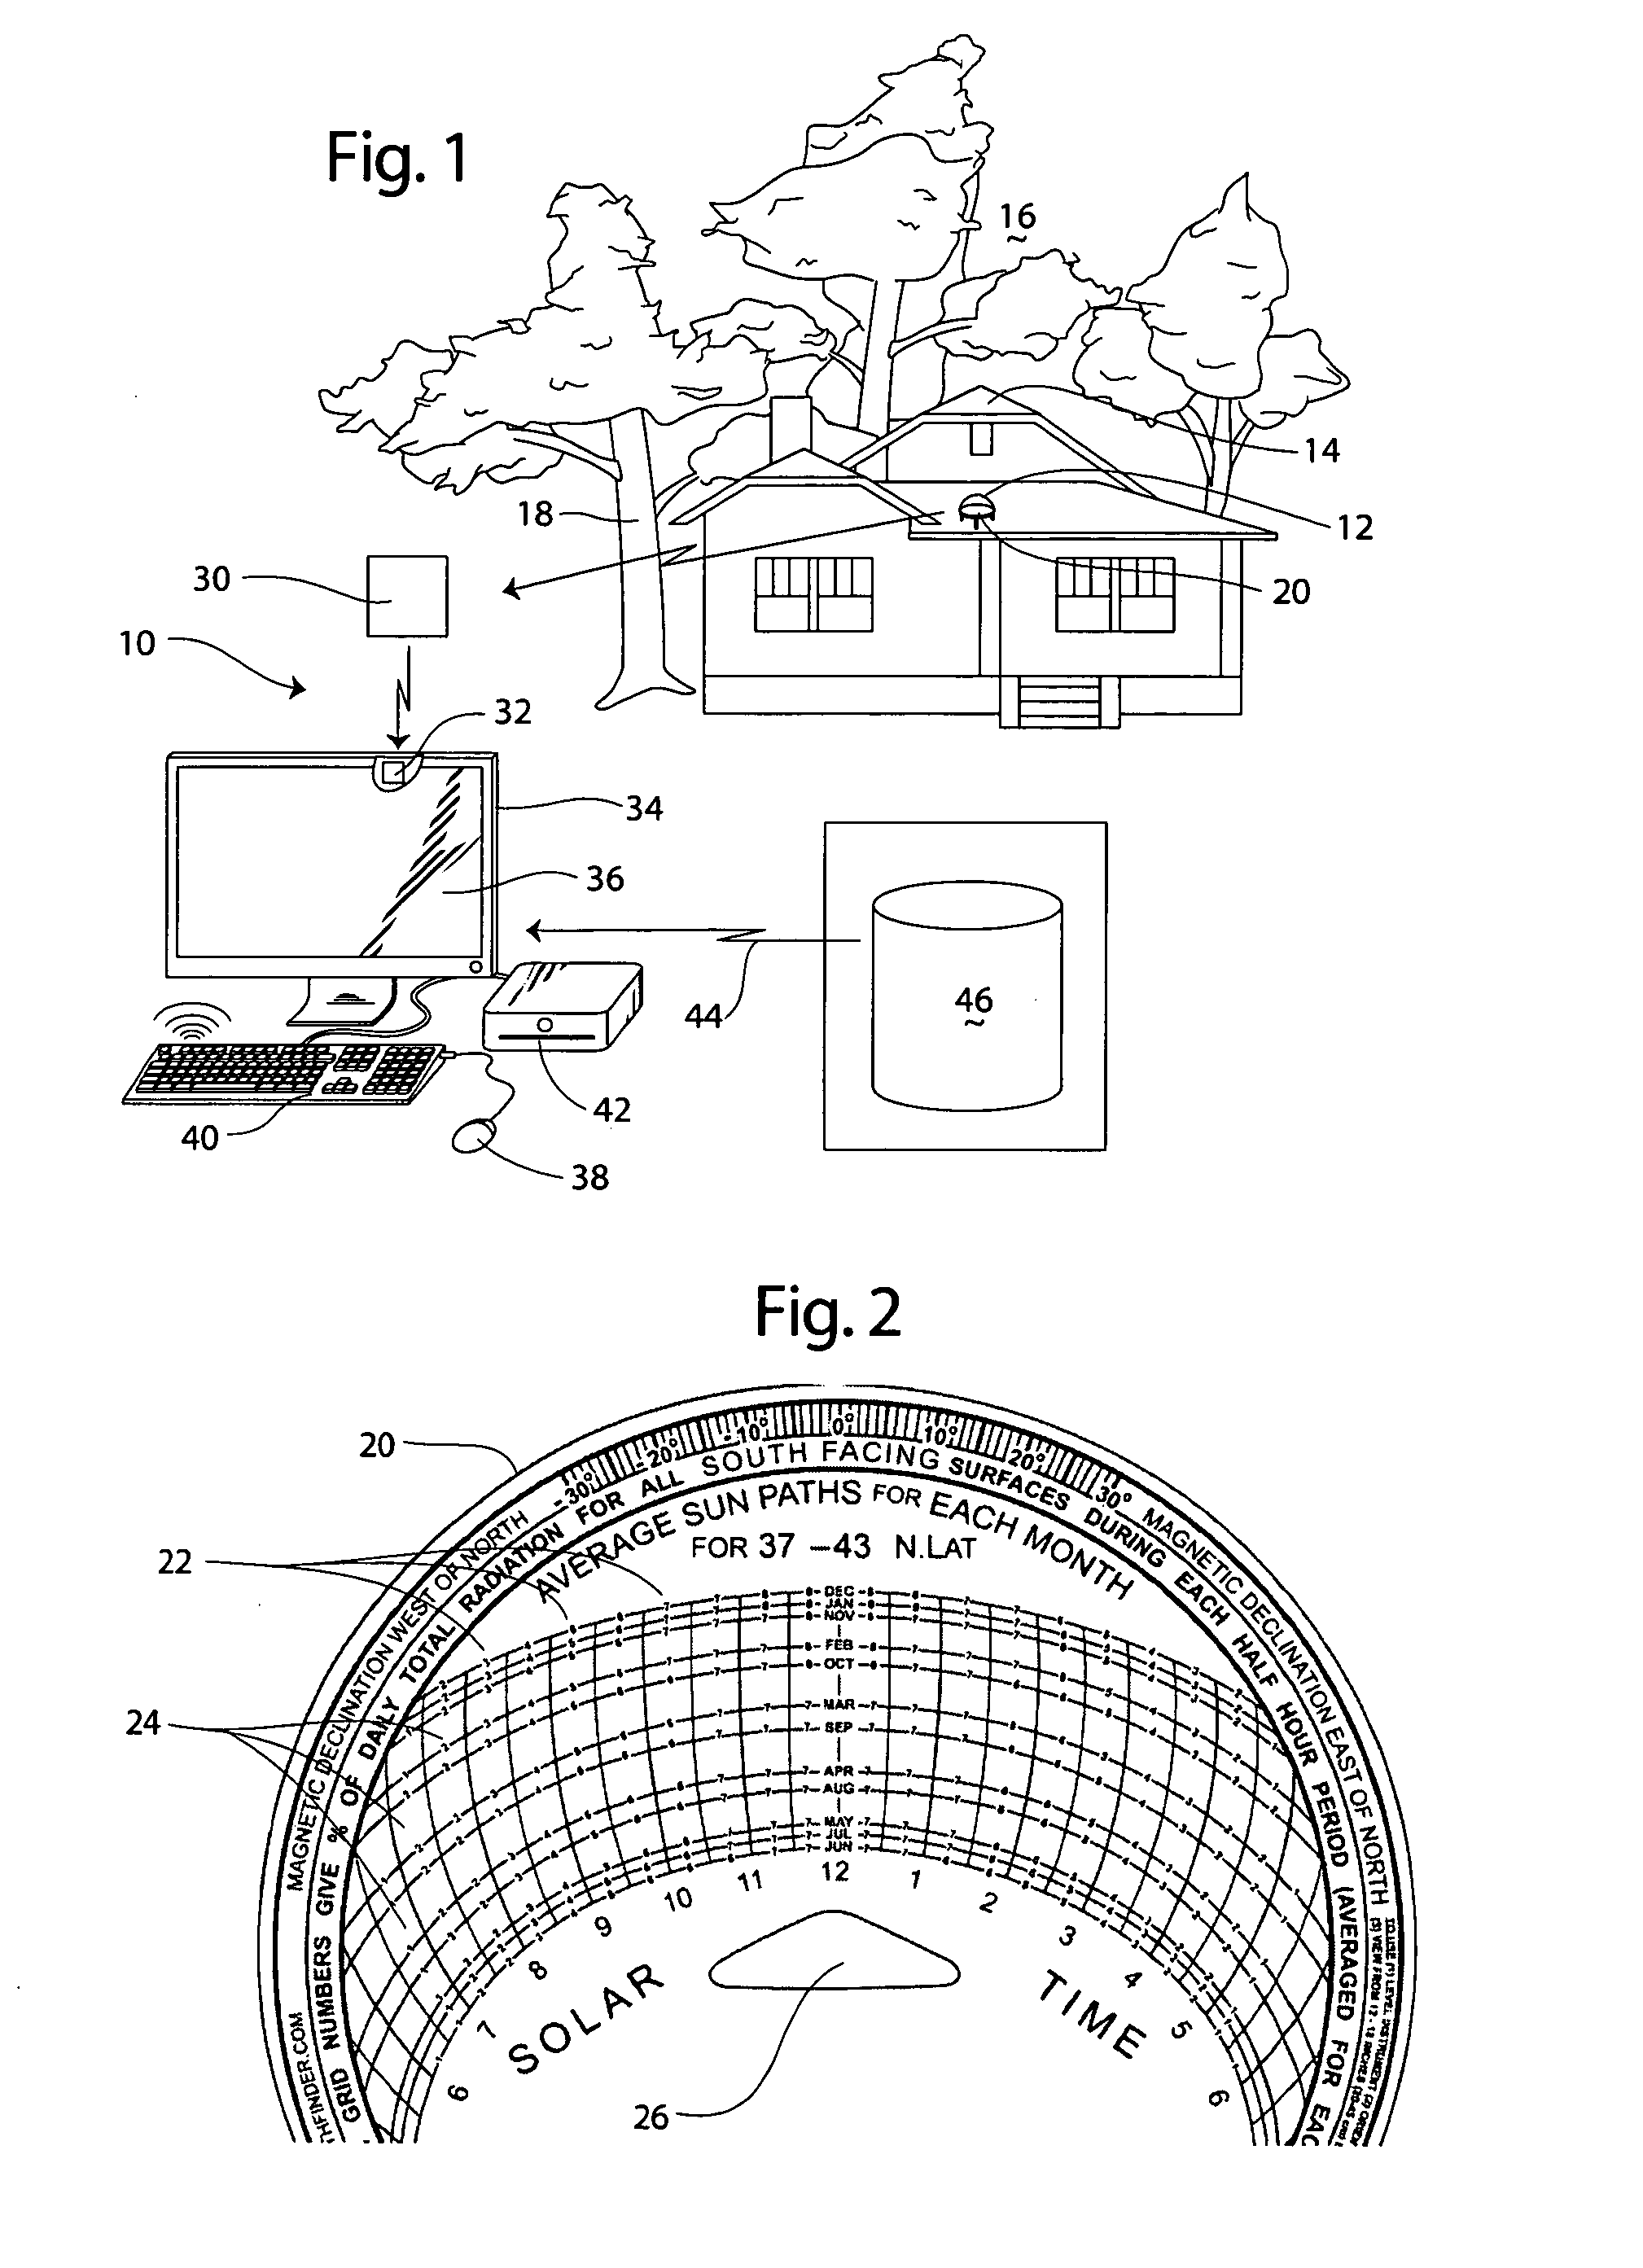 Solar site selection apparatus and method